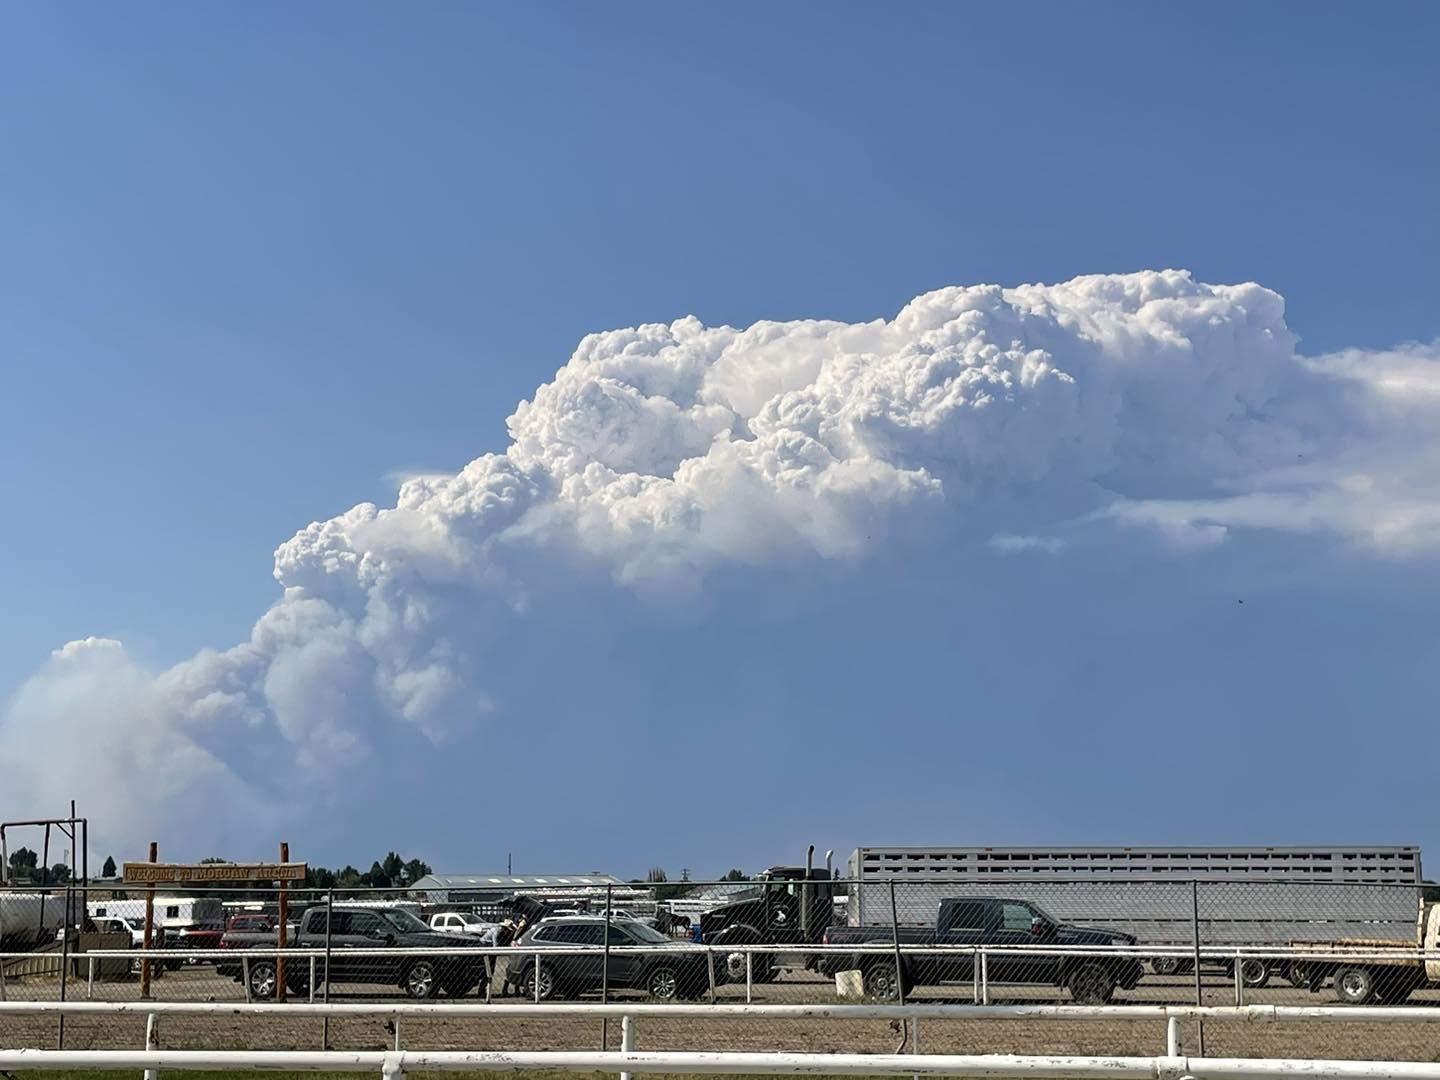 Falls Fire, as seen from the Harney County Fairgrounds 